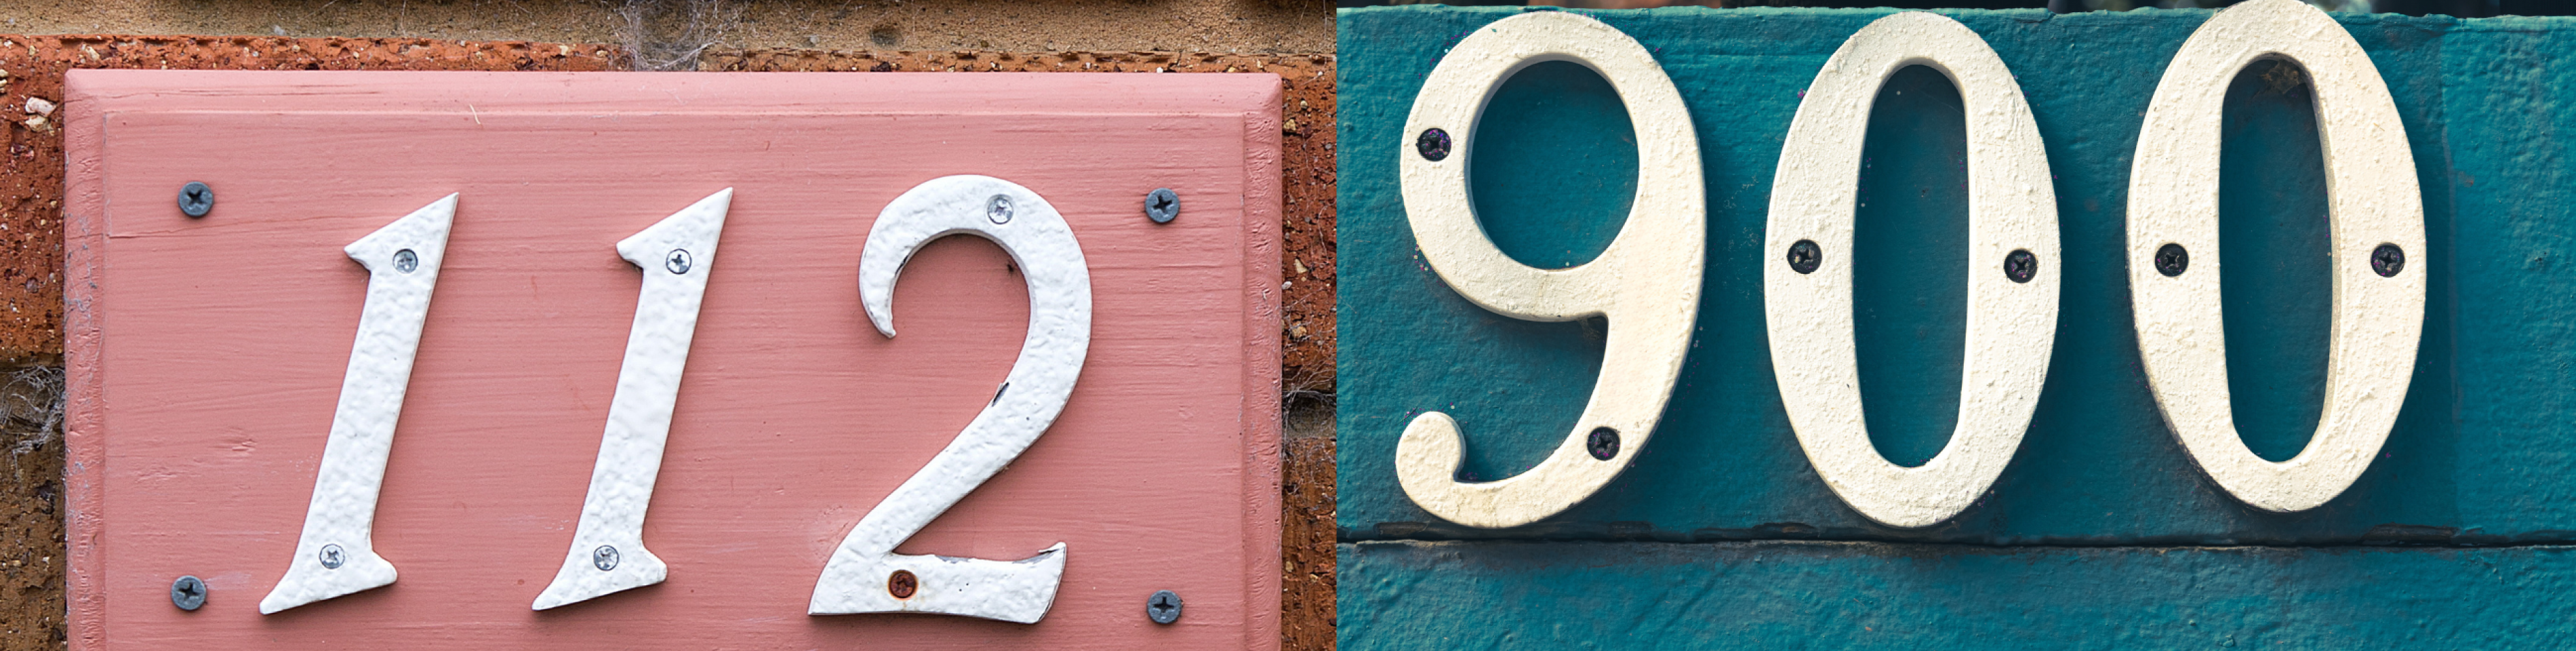 house numbers photo banner